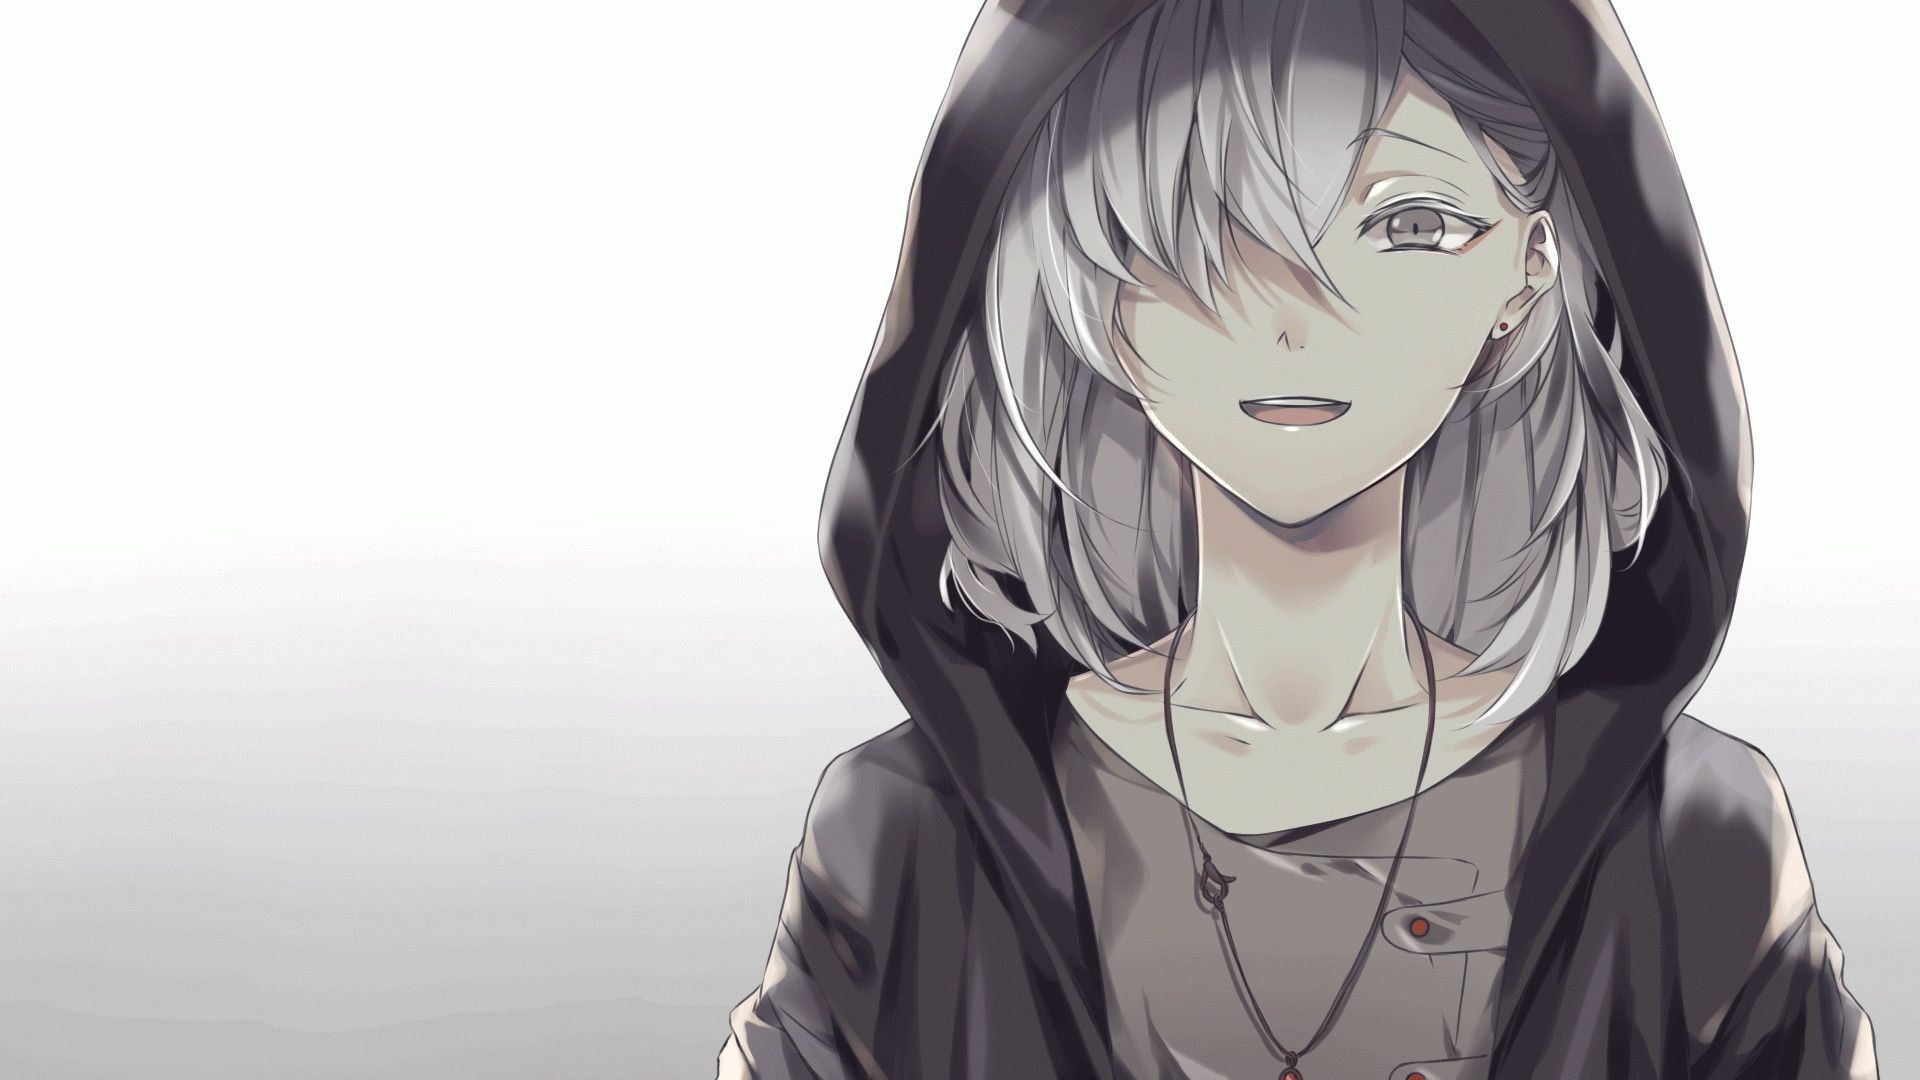 Hooded Sad Anime Boy Wallpapers - Wallpaper Cave